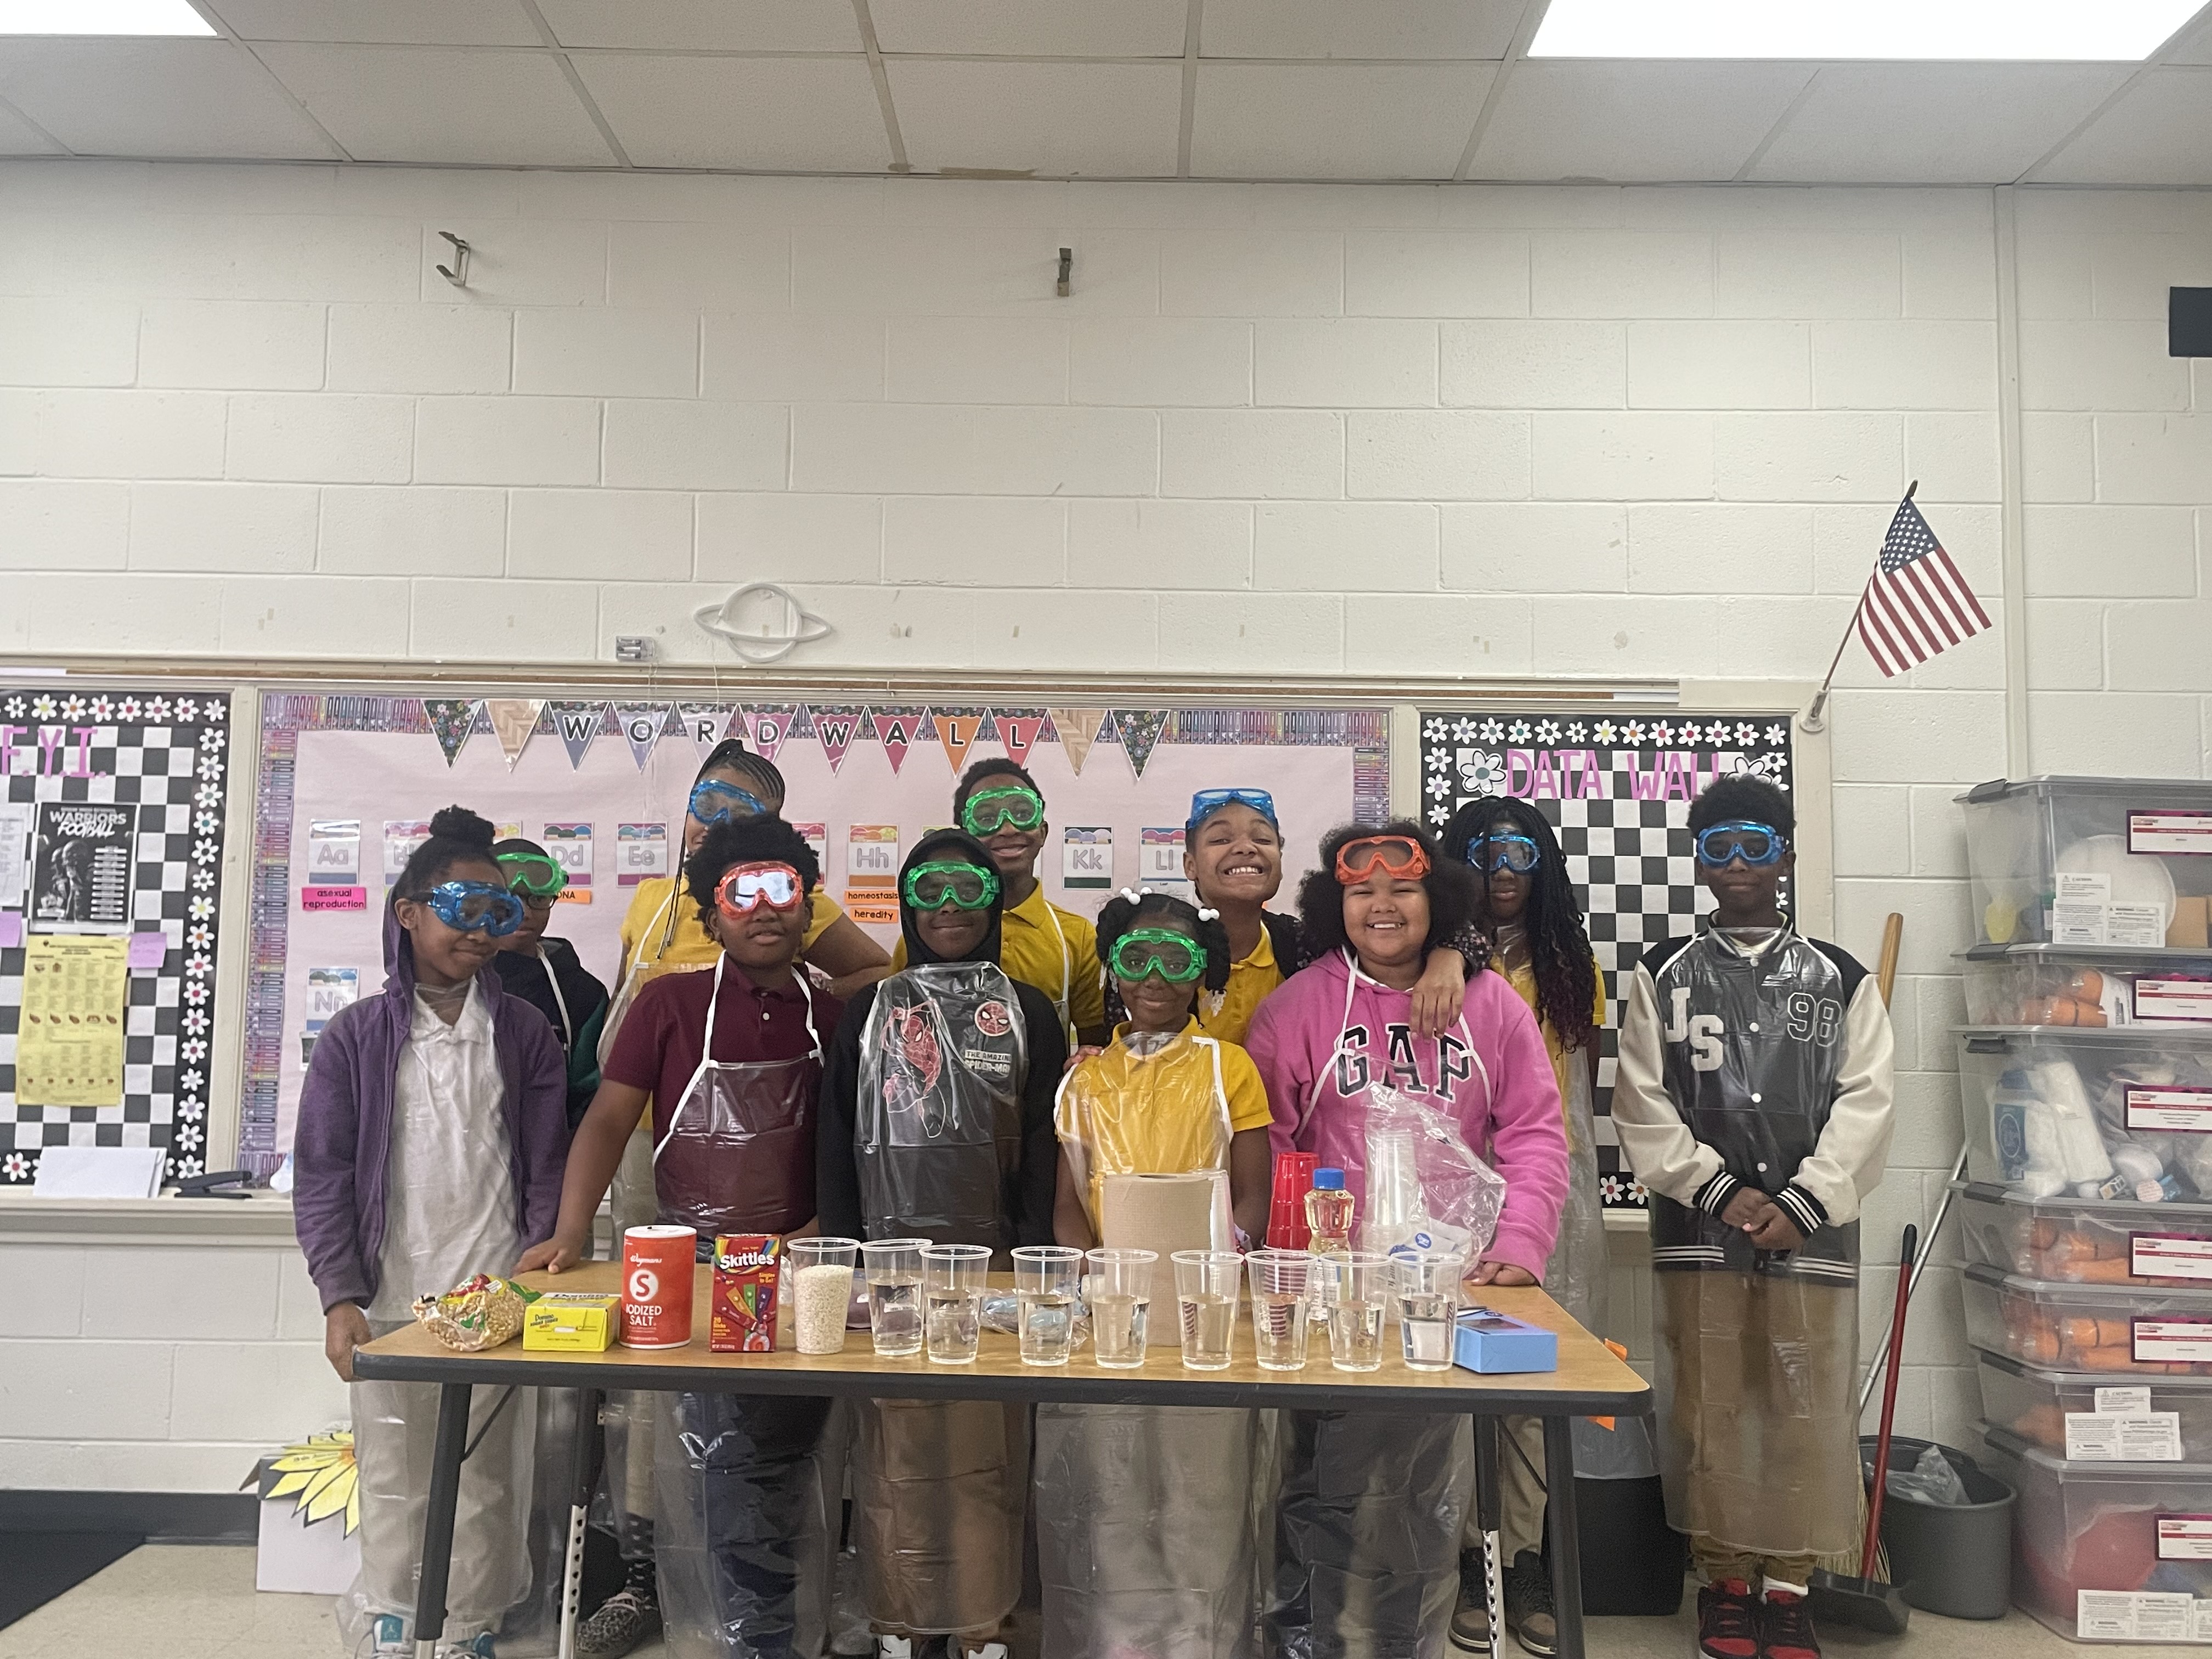 Science class experiment McEvans Elementary school Students